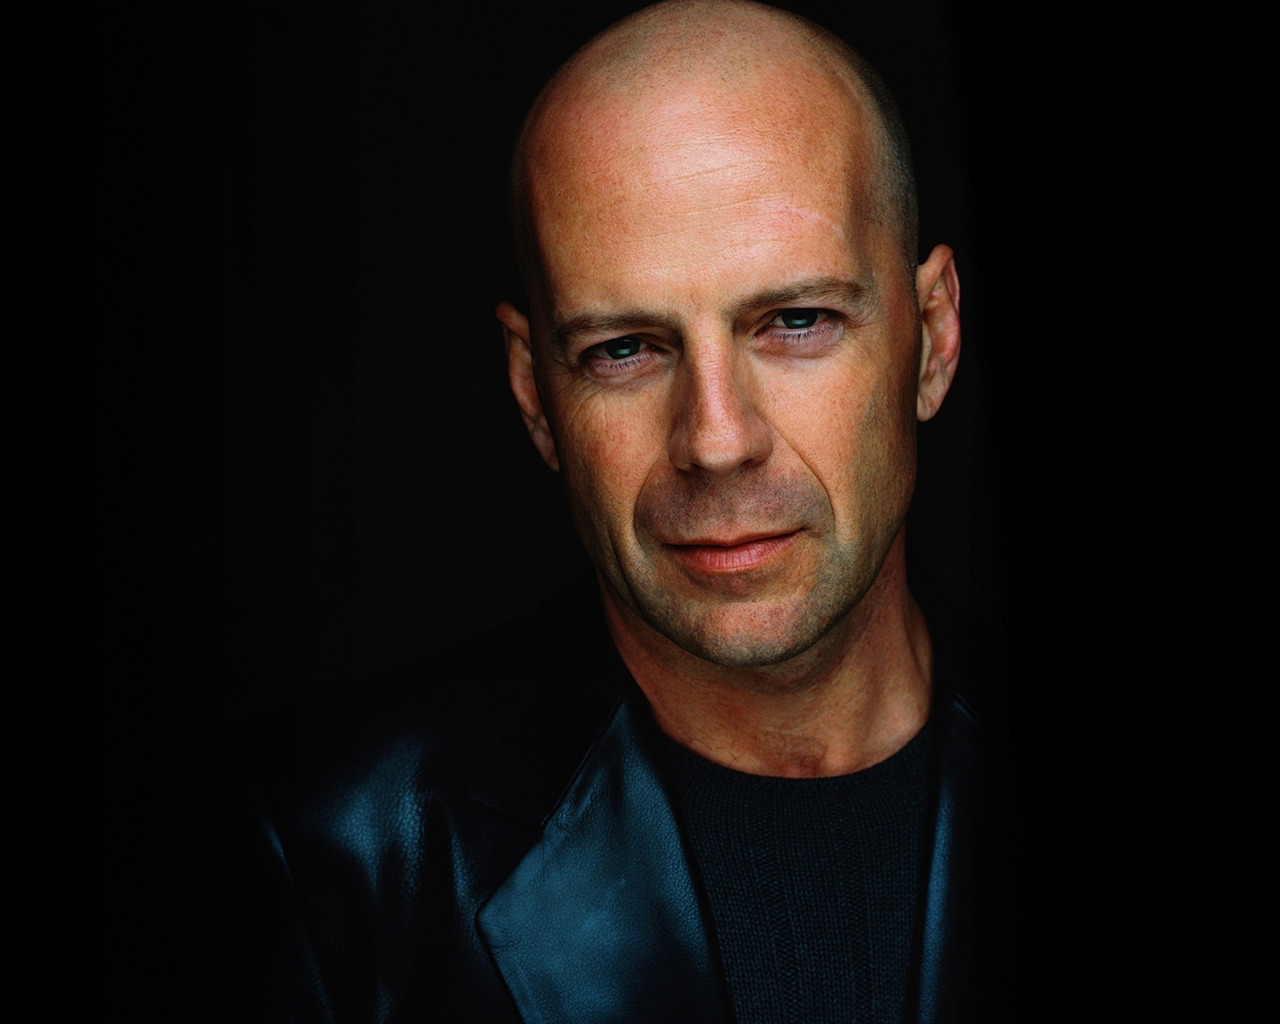 Bruce Willis Profile Look for 1280 x 1024 resolution